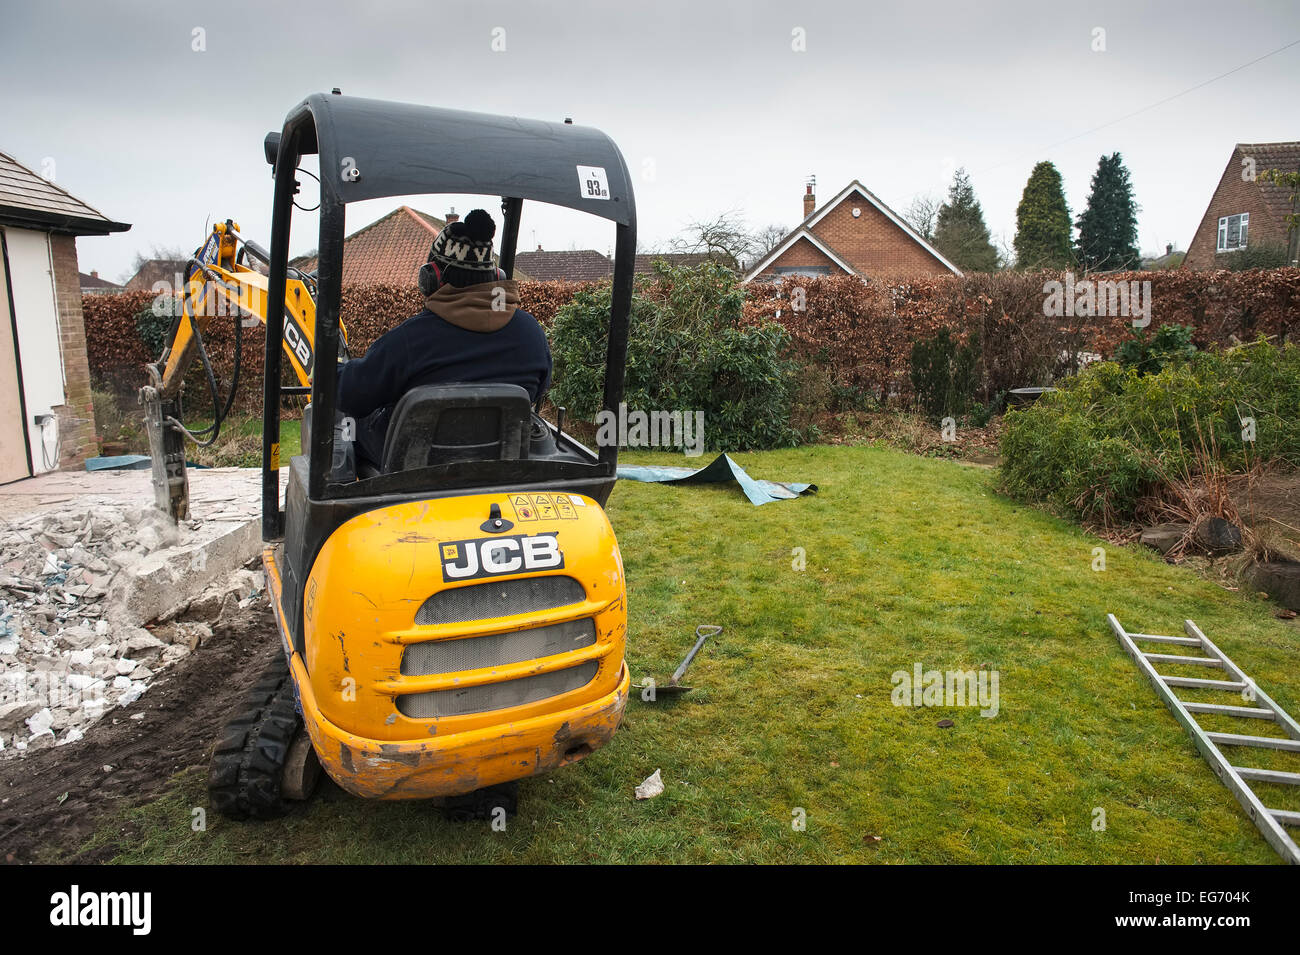 Digging up old foundations footings on a residential extension project using a pecker attached to a compact excavator. Rear view Stock Photo